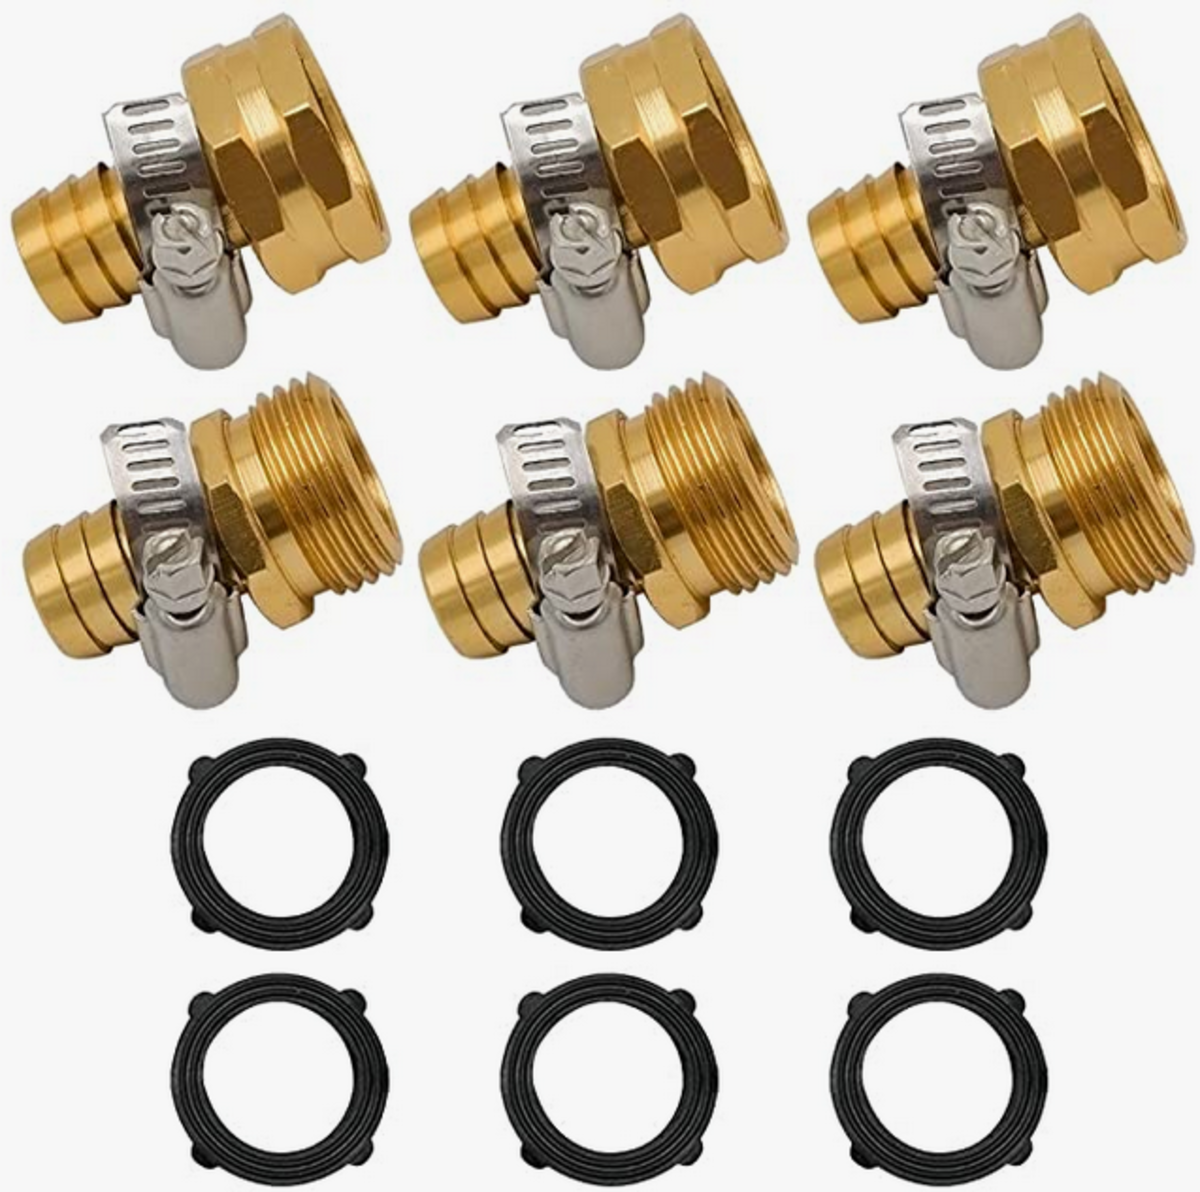 PACK 5 THREADED TAP CONNECTORS 1/2" & 3/4" REDUCERS SUPPLIED HOZELOCK COMPATIBLE 